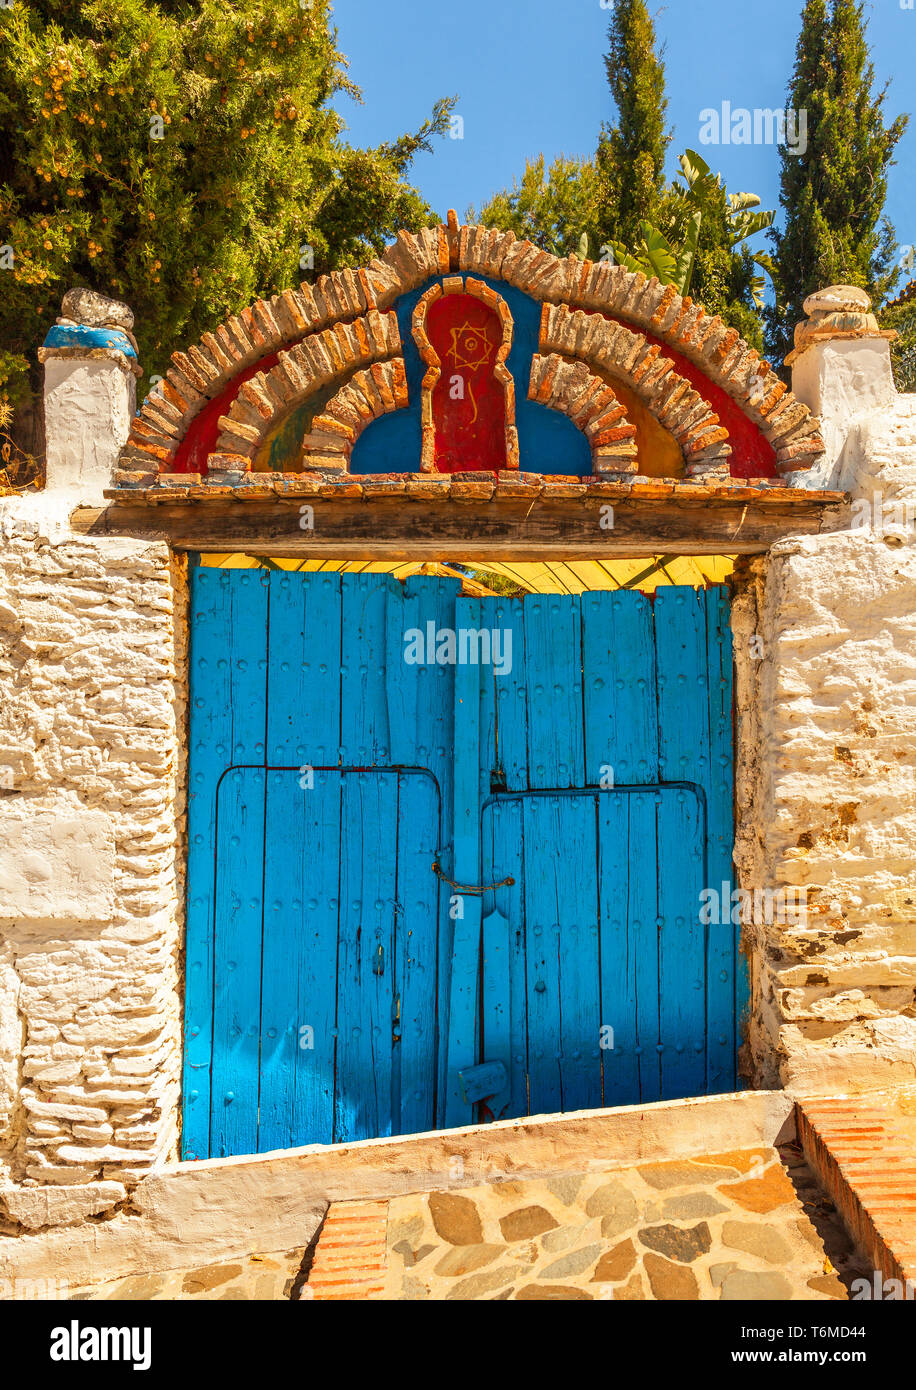 Brightly coloured gateway in Macharaviaya, mountain village and home to international artists, Province of Málaga, Andalusia, Spain. Stock Photo